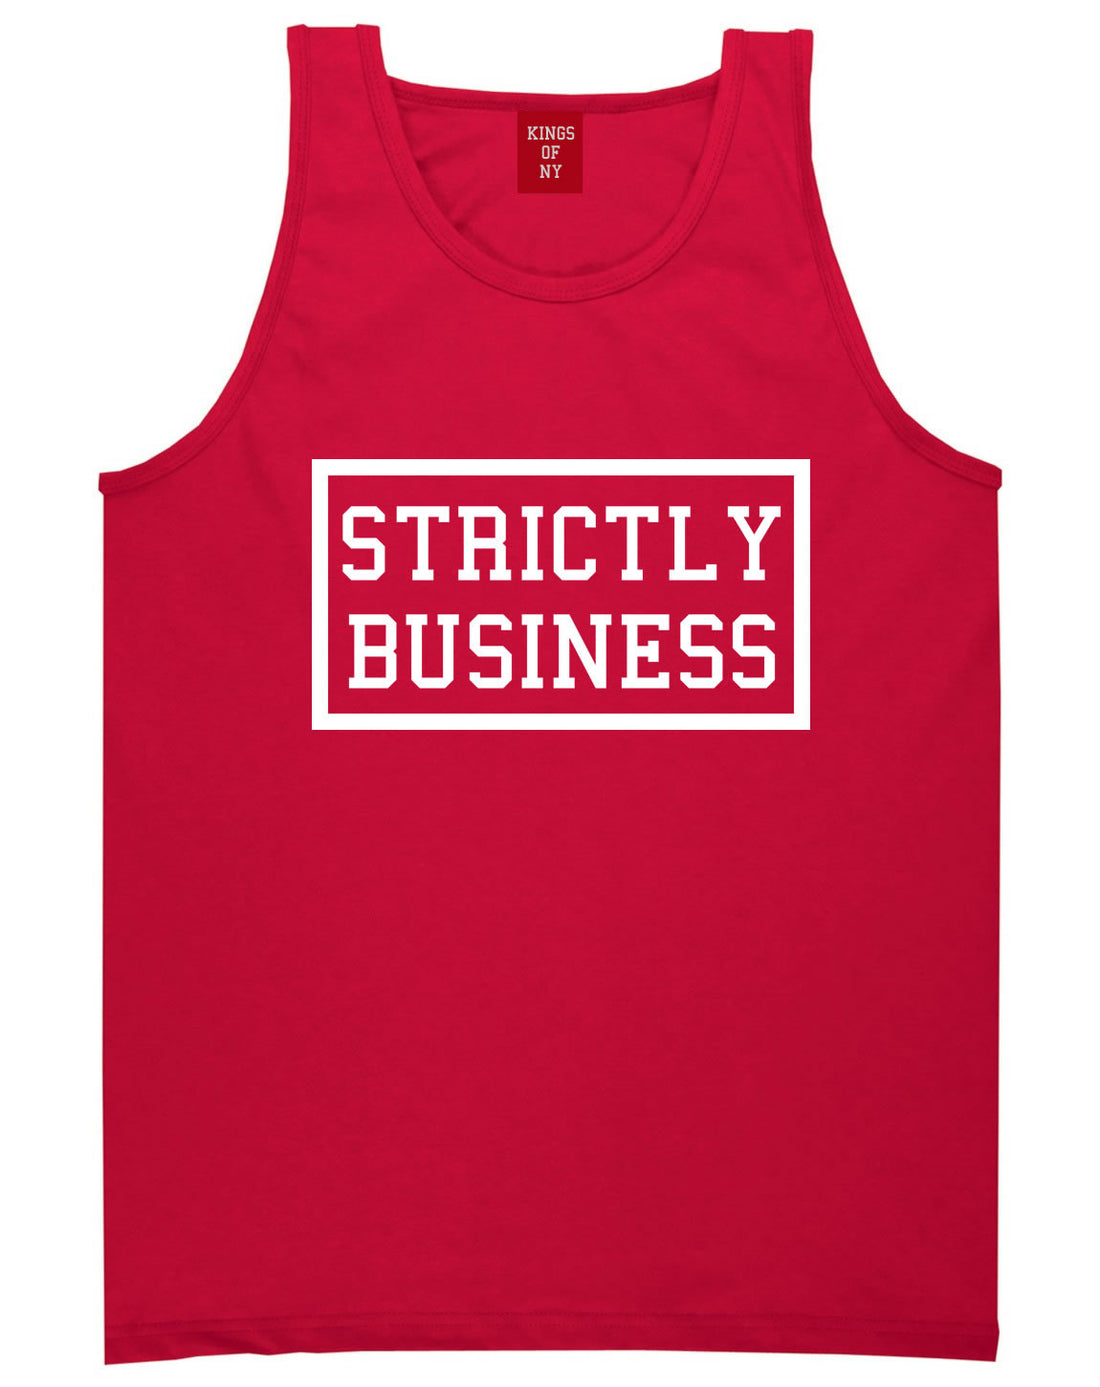 Strictly Business Tank Top in Red by Kings Of NY